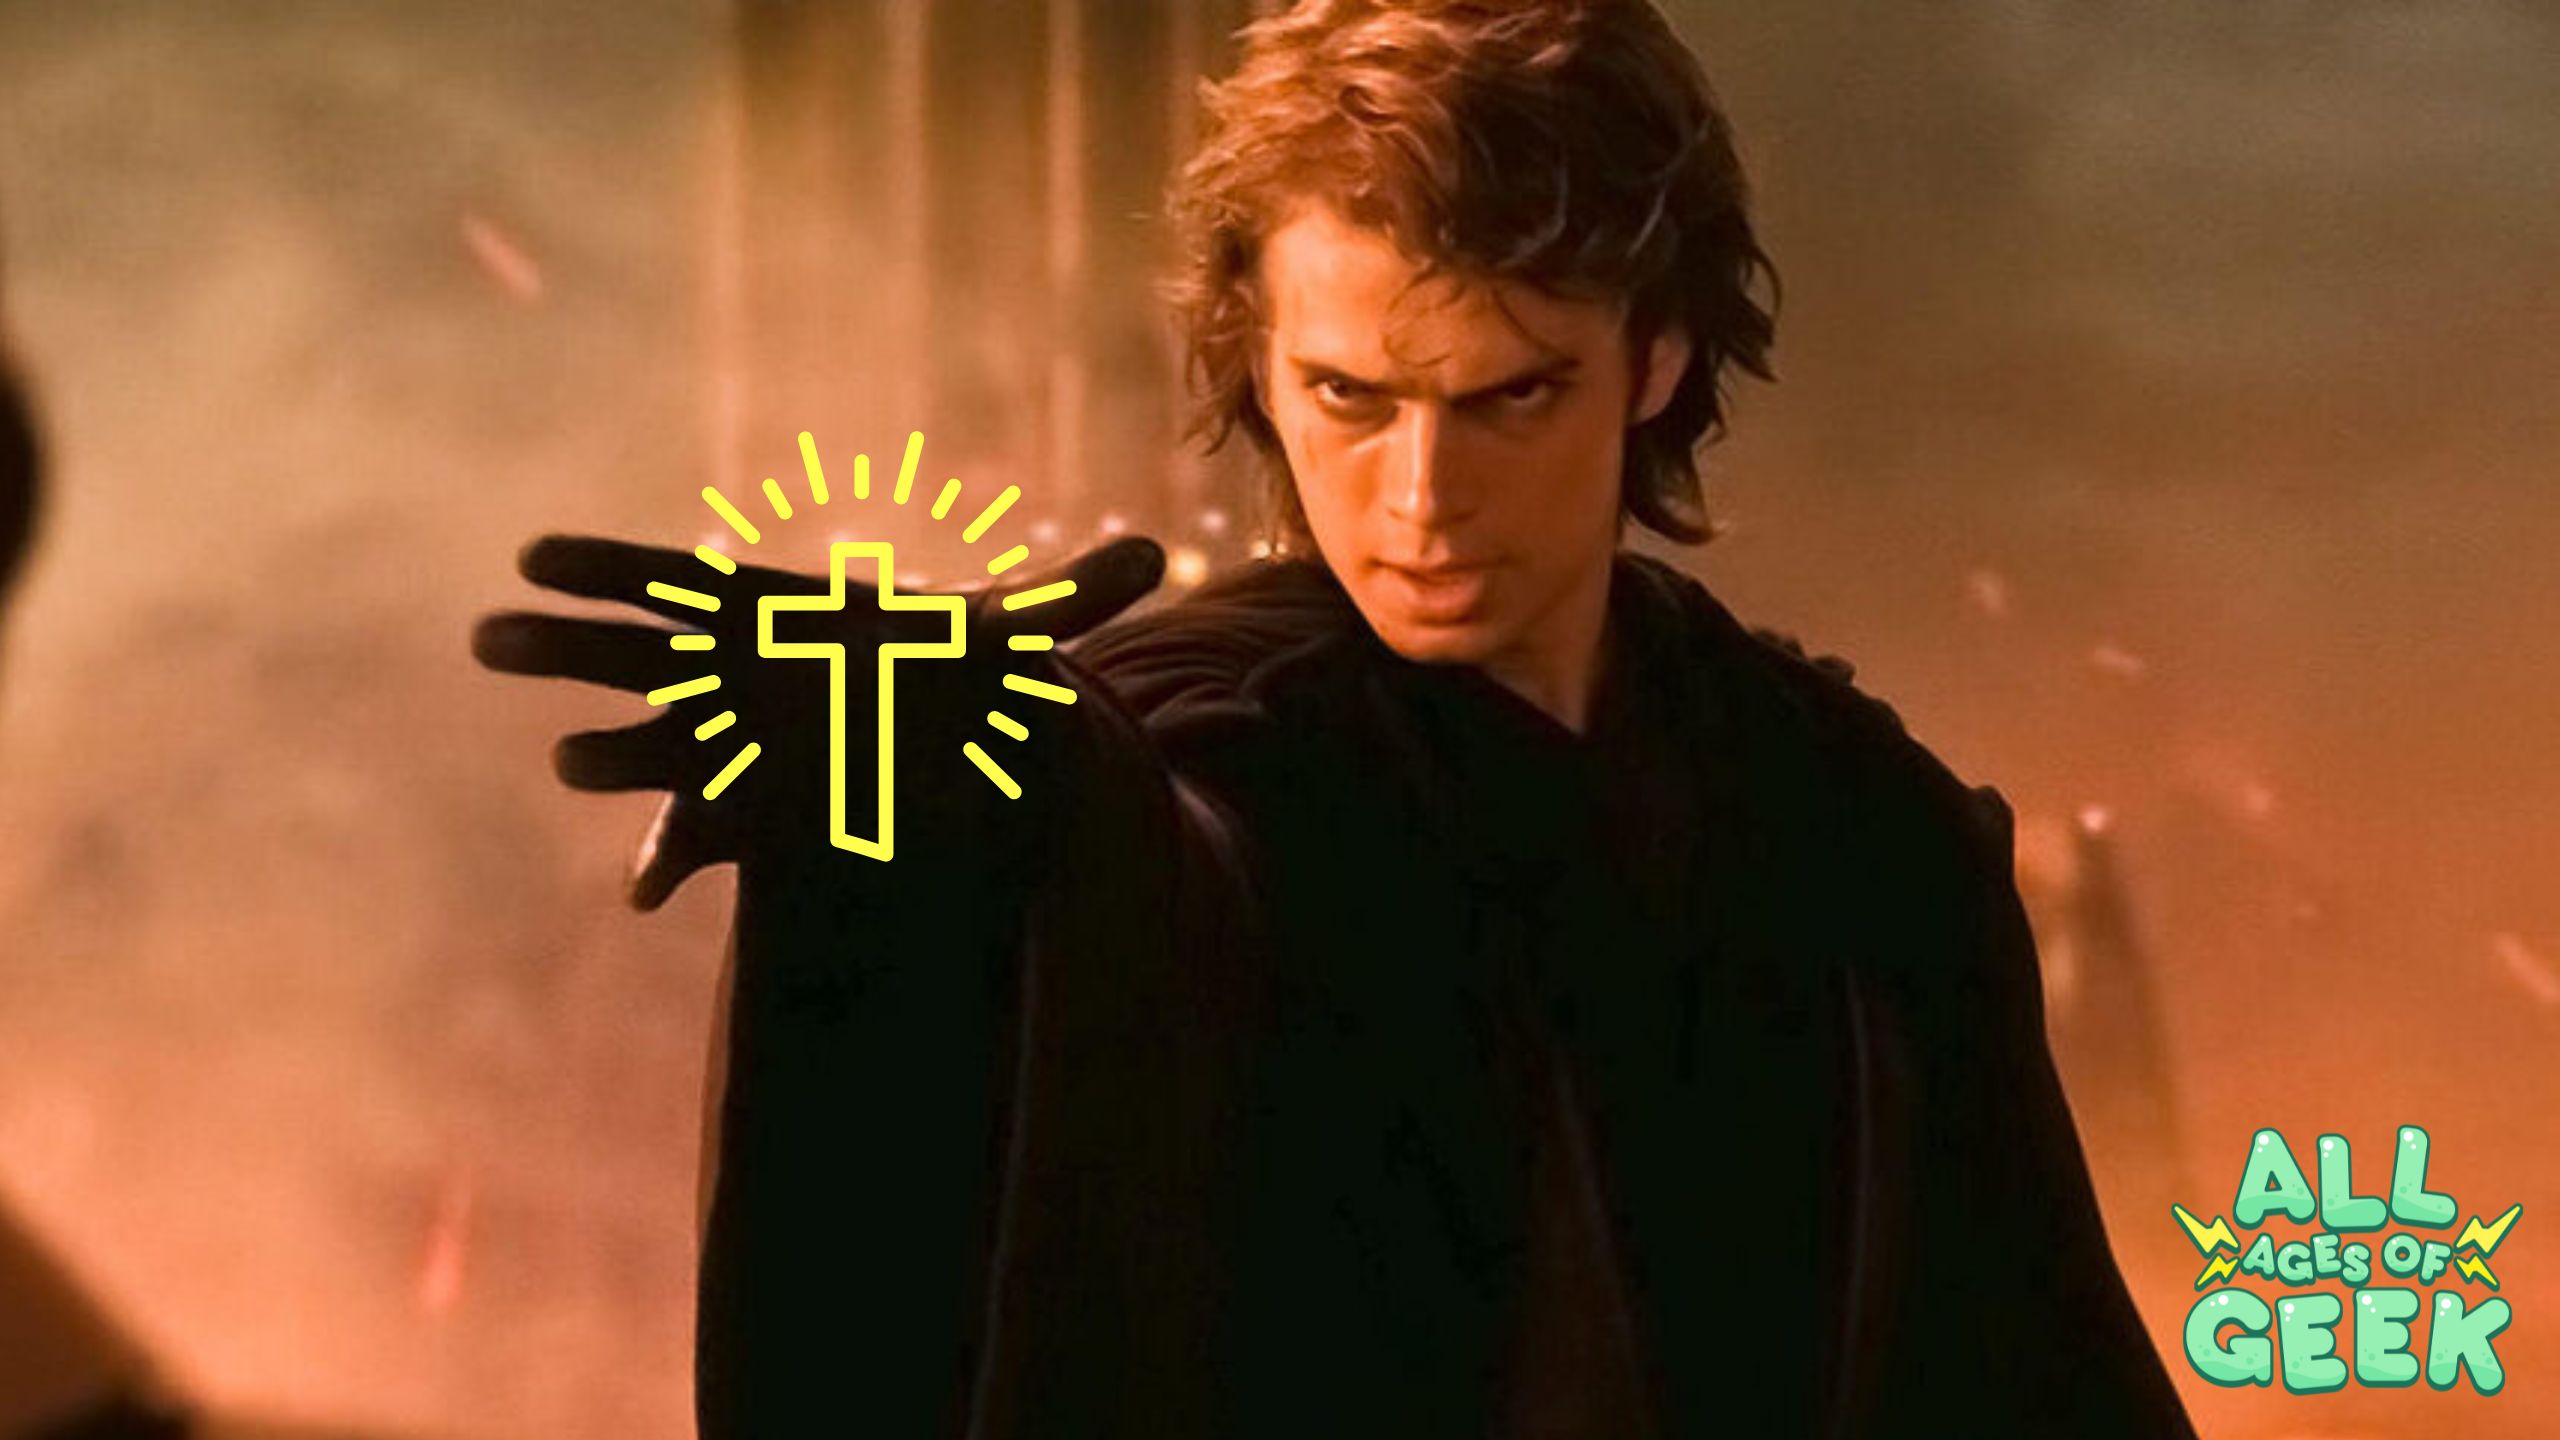 The image features a person Anakin from Star Wars with a focused and intense expression. They are extending their hand forward with a symbol that appears to represent a cross radiating with light superimposed over it, suggesting a thematic emphasis on the individual's action. The person is dressed in a dark outfit, which could be indicative of a particular role or character within a narrative. In the background, there is an orange, hazy ambiance that adds a dramatic effect to the scene. The logo "All Ages of Geek" is visible in the bottom right